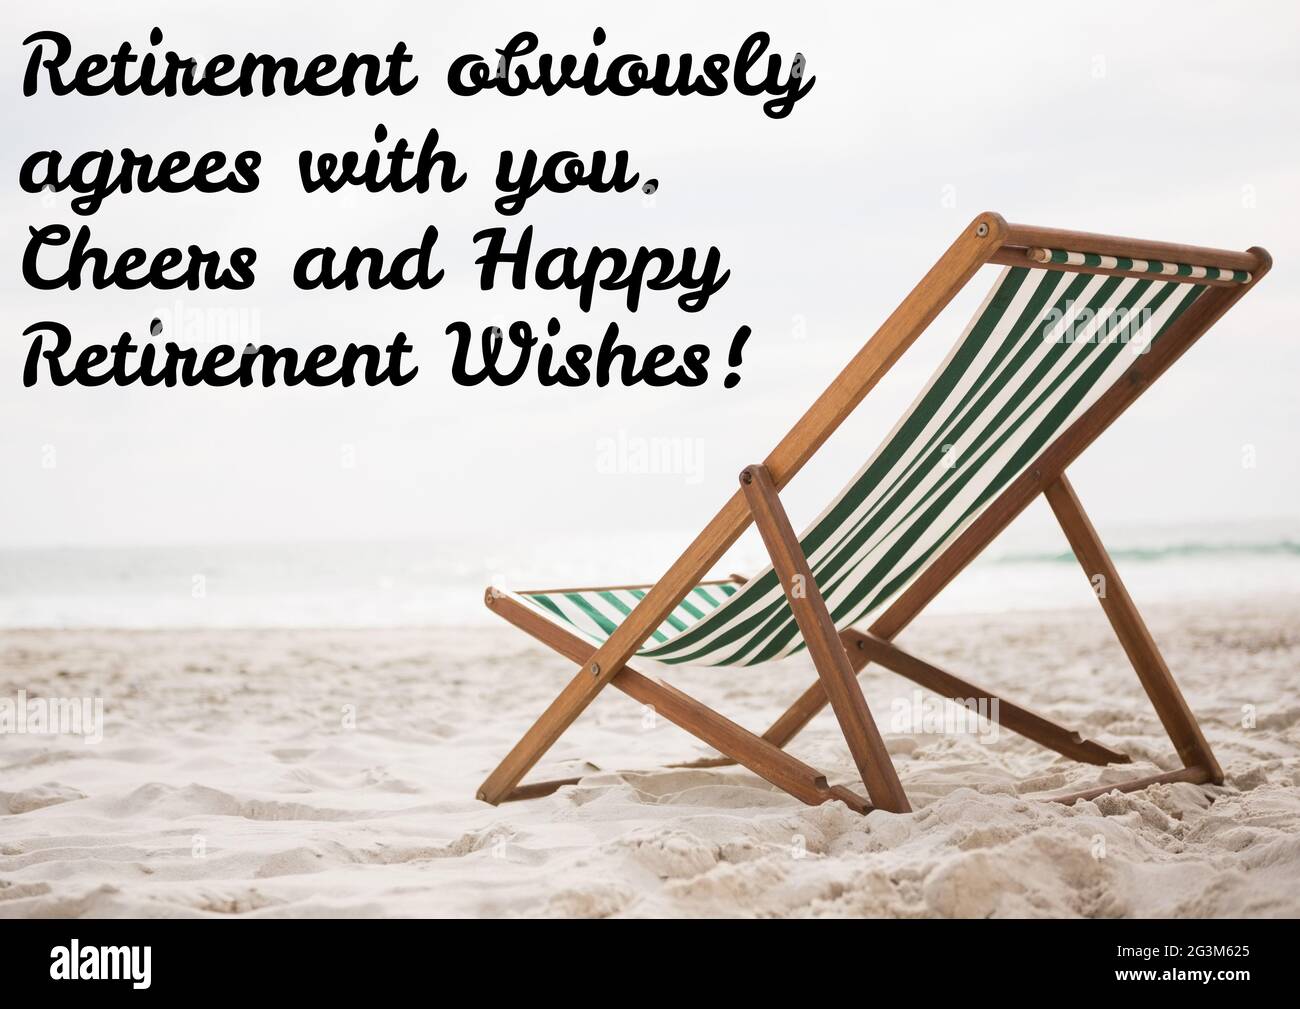 The Ultimate Collection of 4K Retirement Wishes Images - Top 999 ...